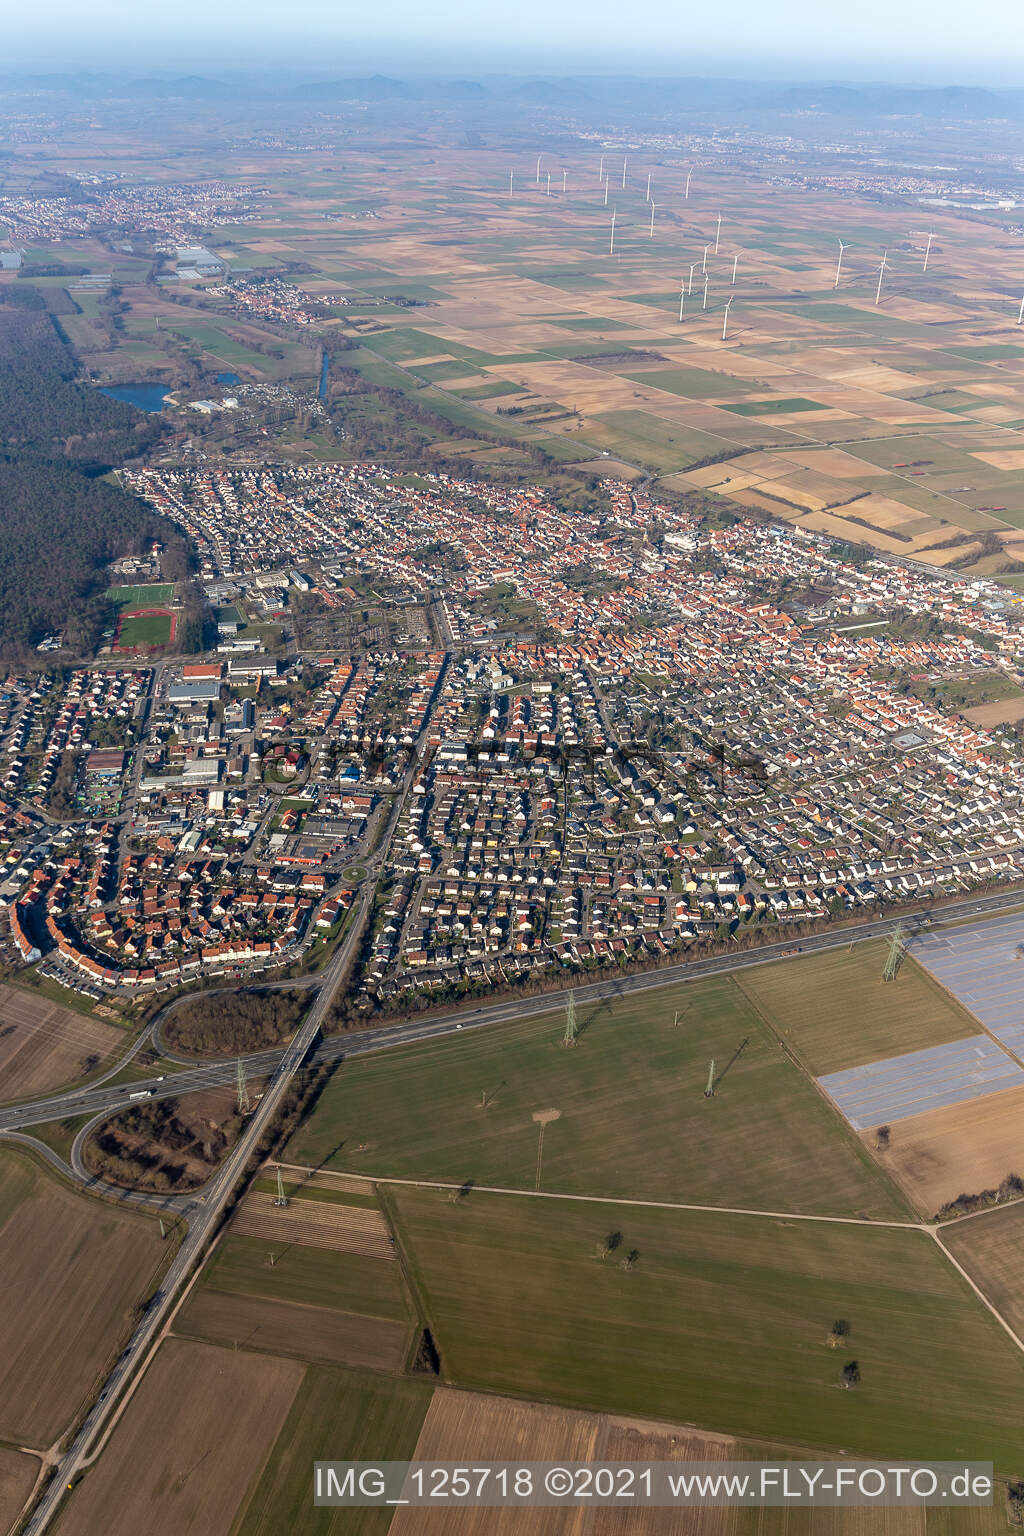 Rülzheim in the state Rhineland-Palatinate, Germany seen from above